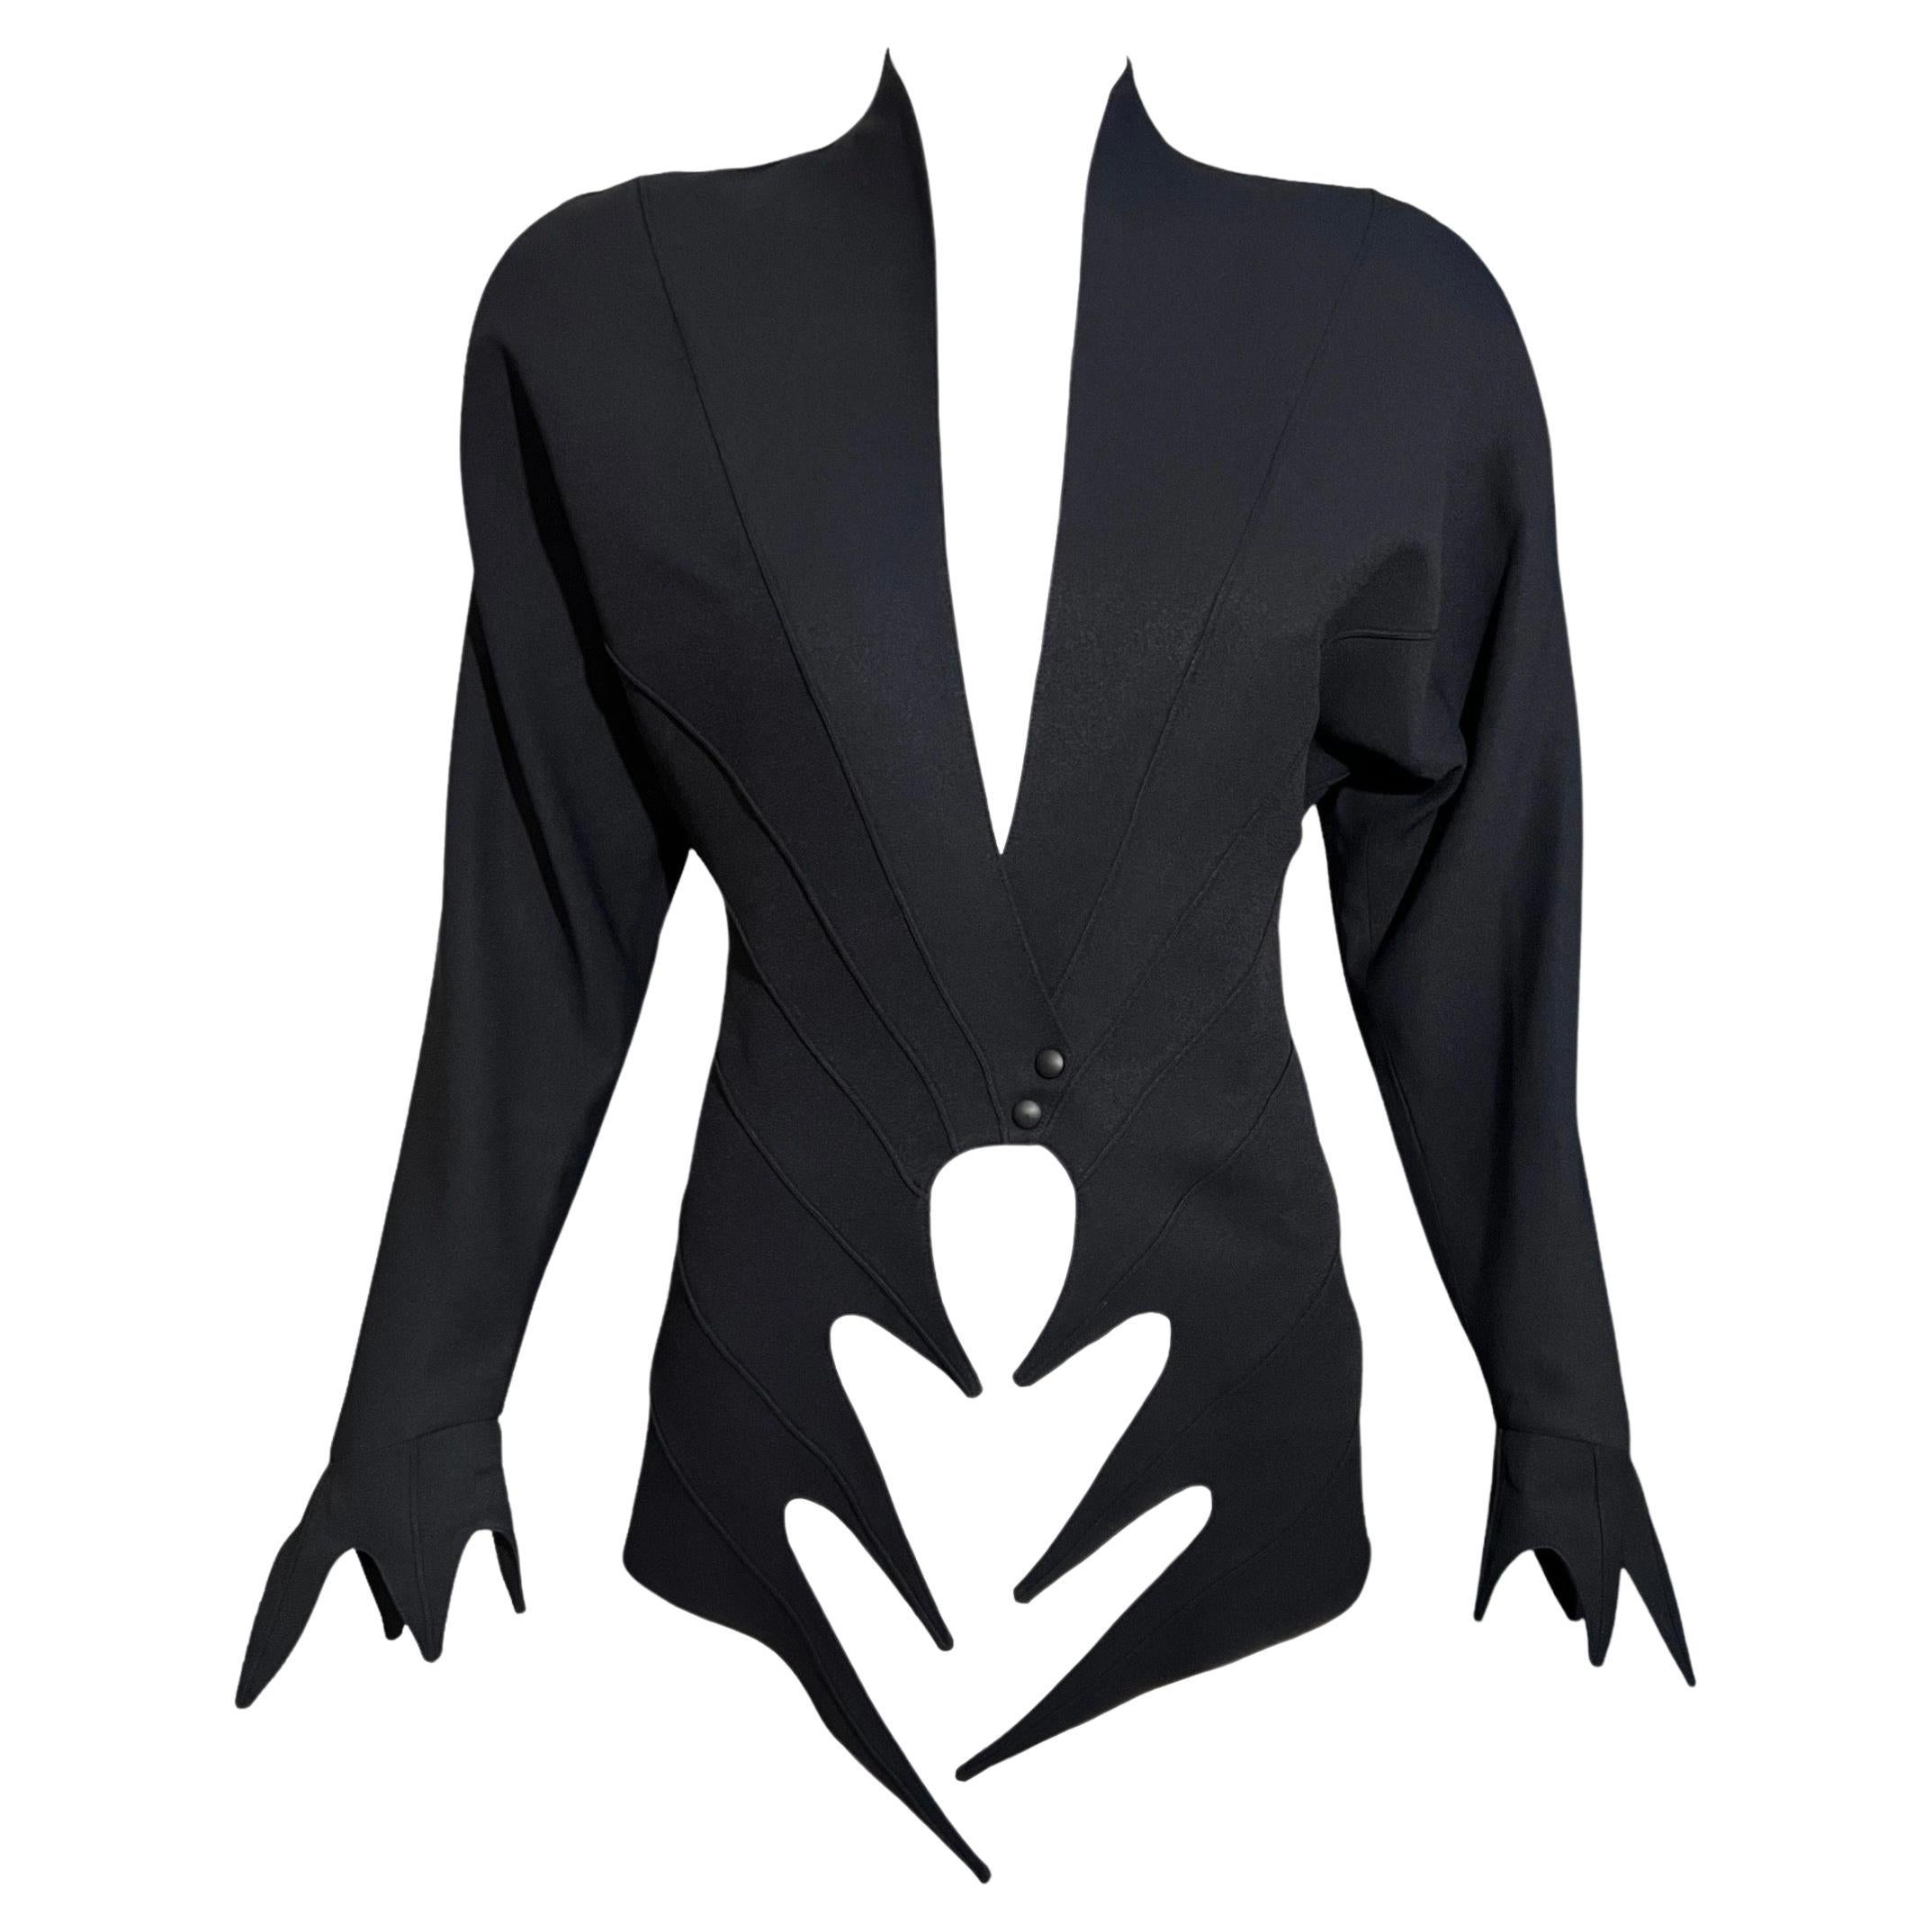 S/S 1989 Thierry Mugler Runway Sculptural Black Pointed Cutout Jacket  For Sale